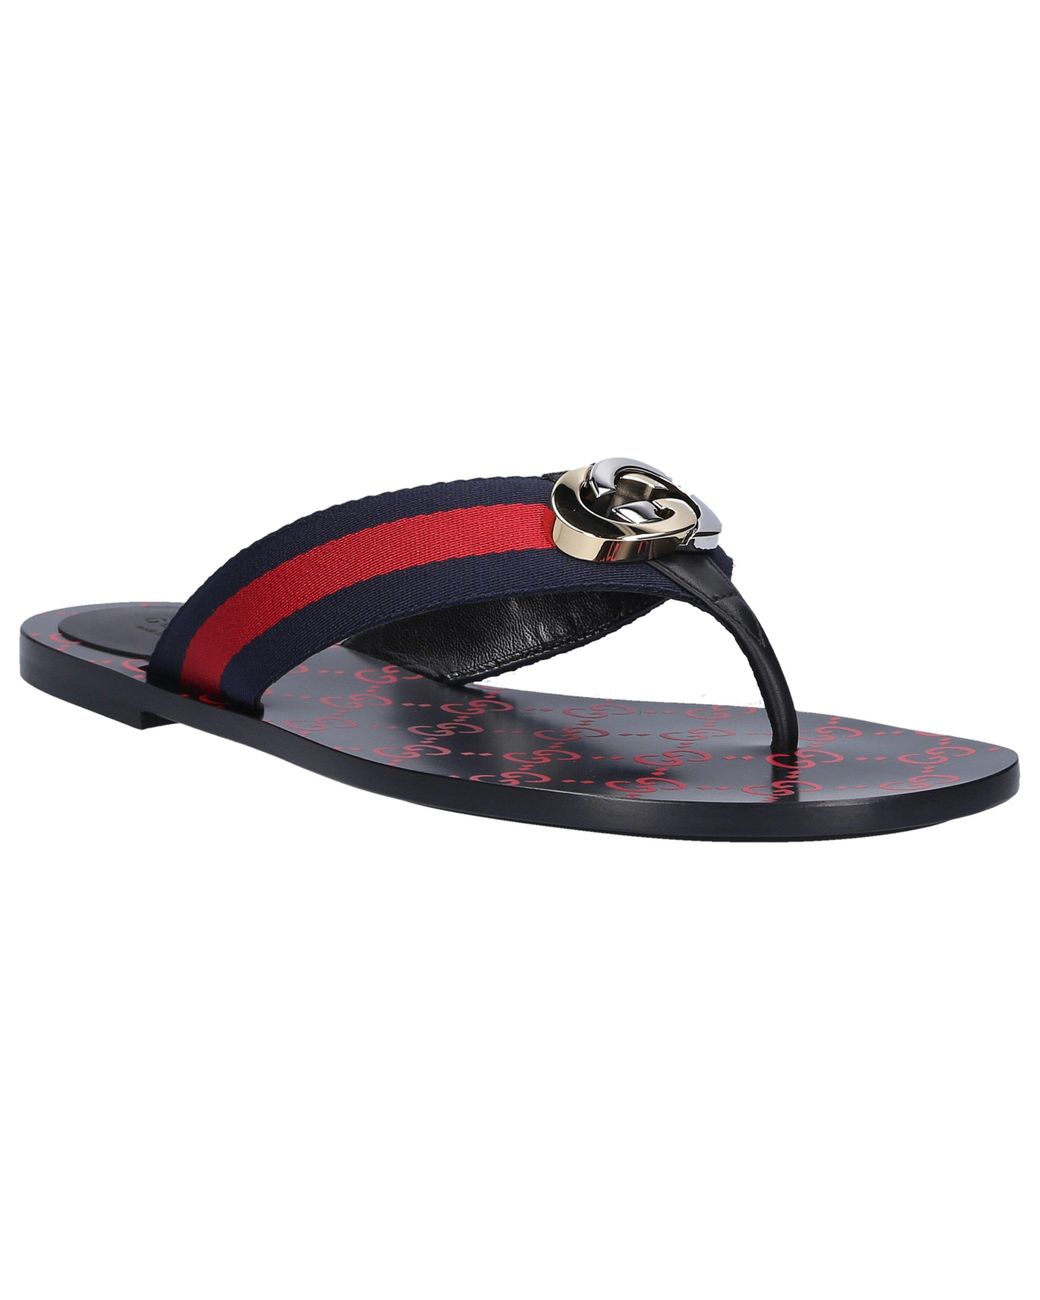 Gucci Cotton Flip Flops Kika in Blue/Red (Blue) - Save 7% - Lyst